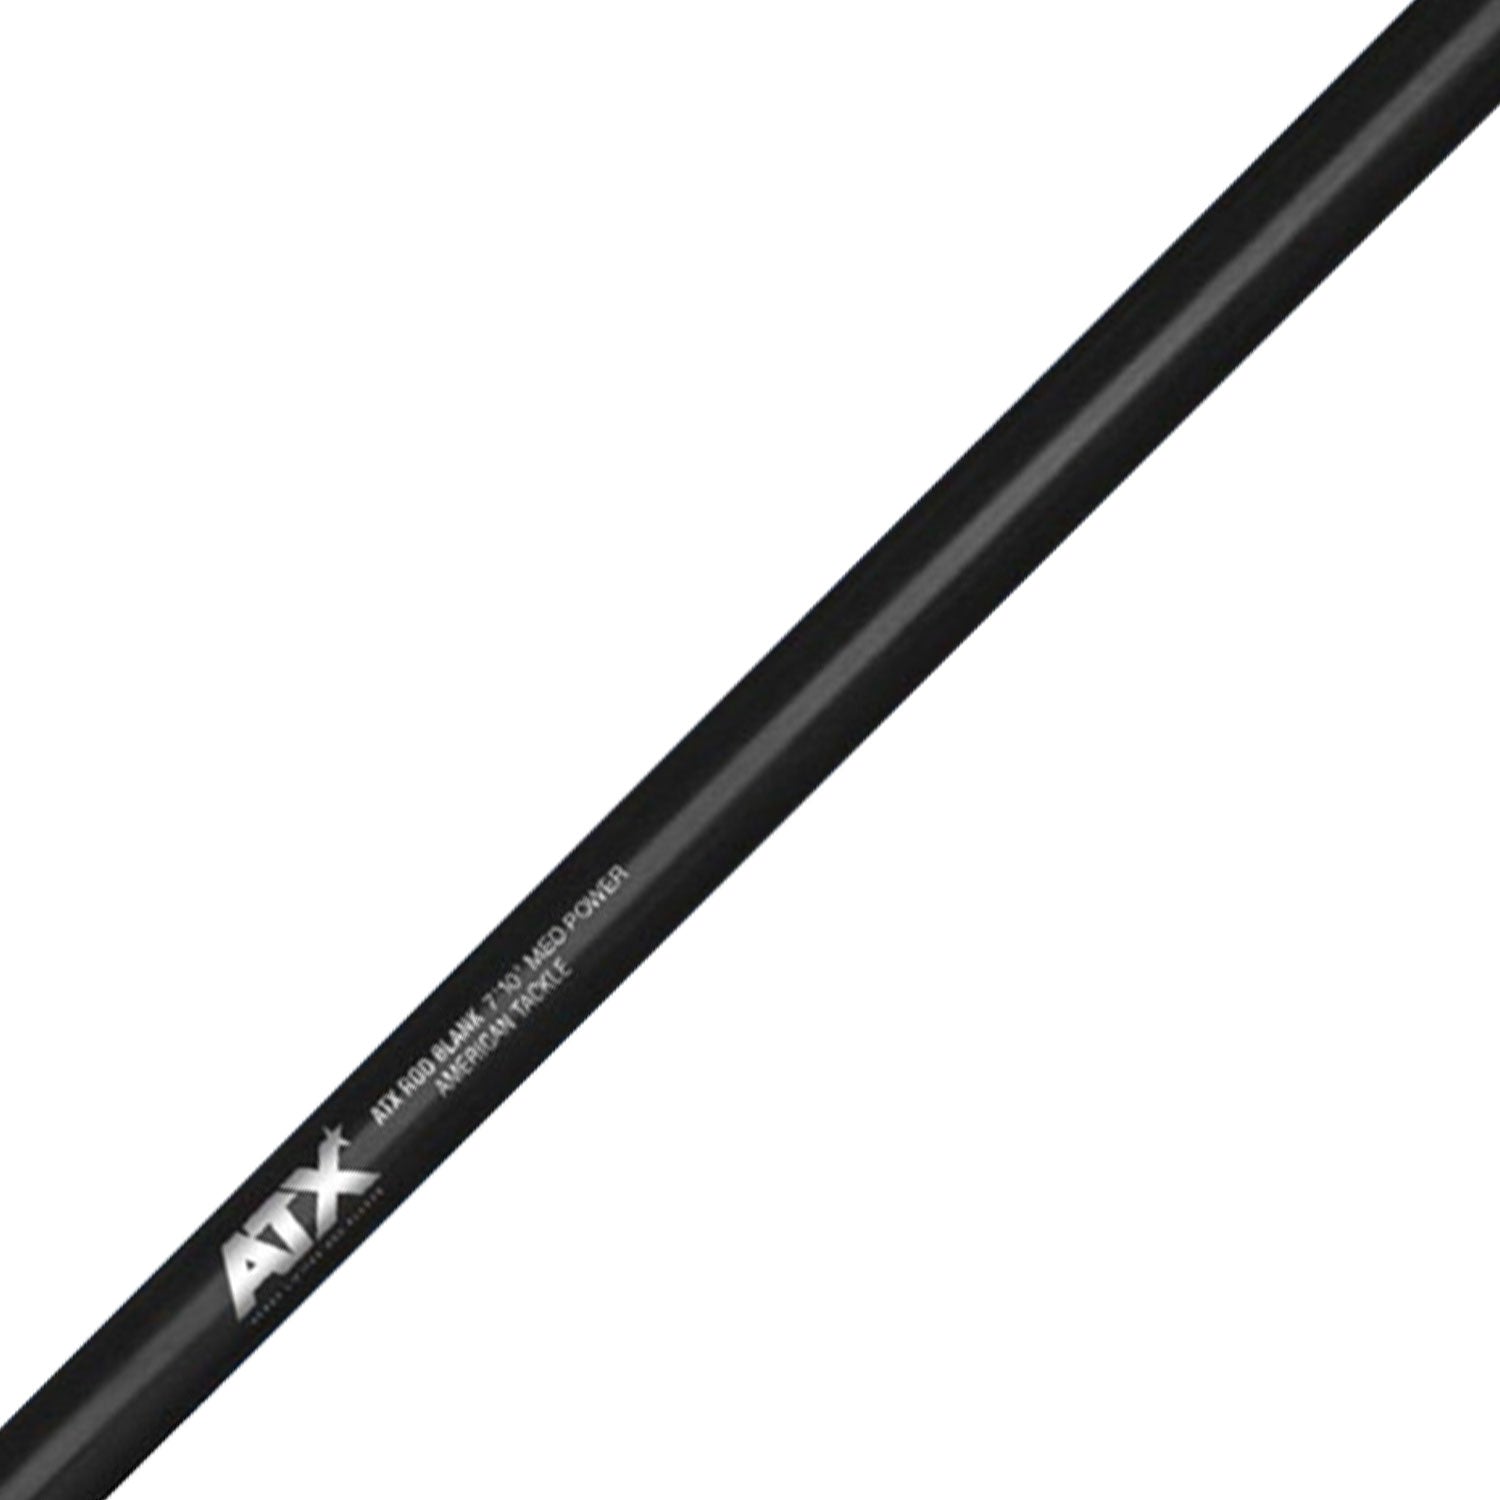 American Tackle AXST56XXHS Stand-Up Tuna Rod Blank